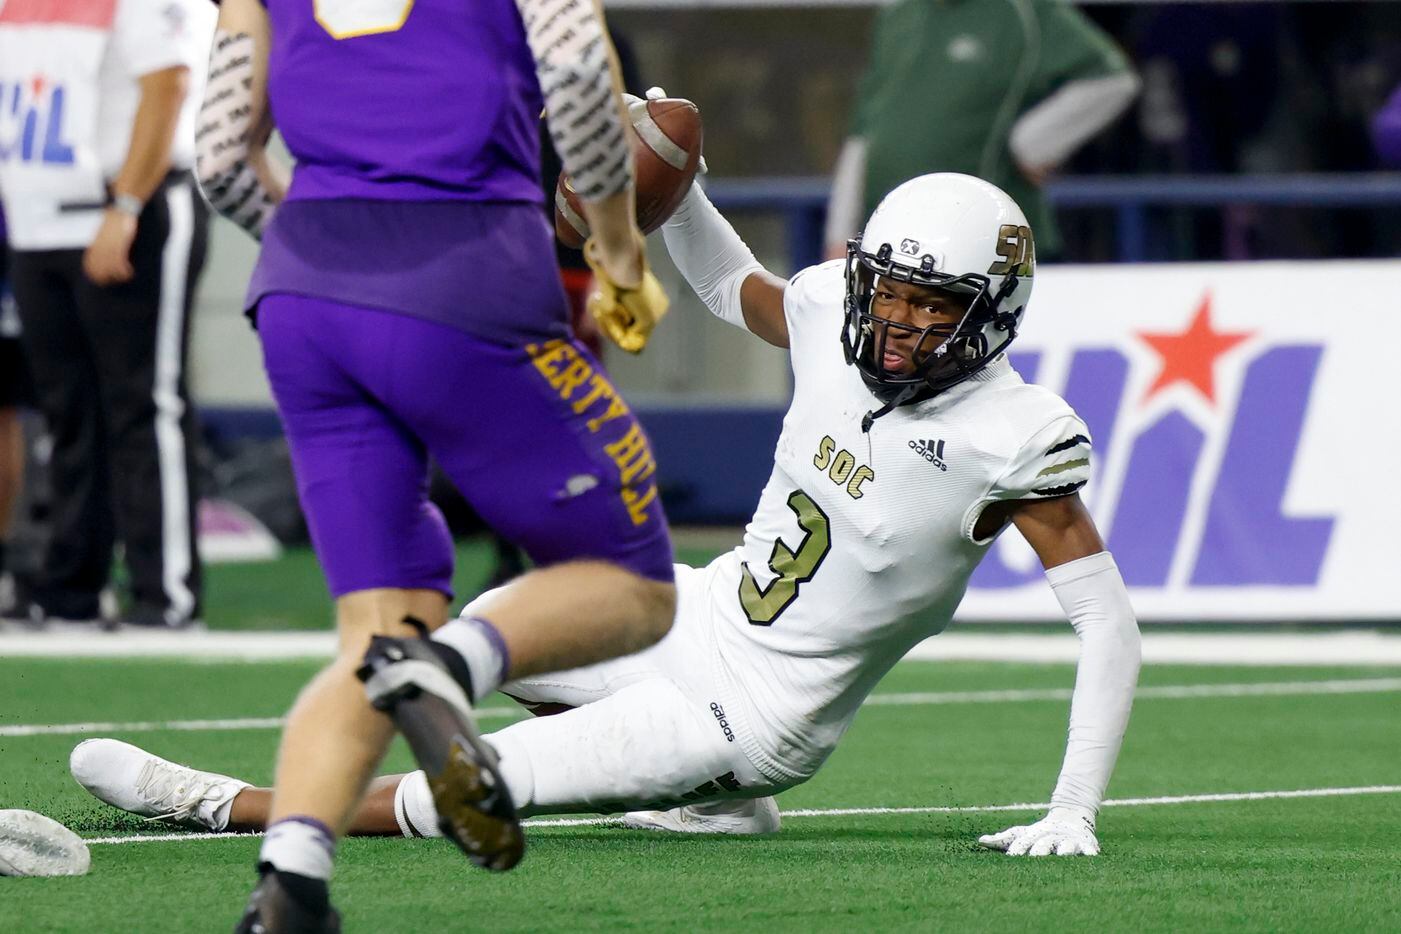 South Oak Cliff wide receiver Kylin Mathis (3) reacts after making a catch during the second half of their Class 5A Division II state championship game against Liberty Hill at AT&T Stadium in Arlington, Saturday, Dec. 18, 2021. South Oak Cliff defeated Liberty Hill 23-14 for Dallas ISD’s first title since 1958. (Elias Valverde II/The Dallas Morning News)